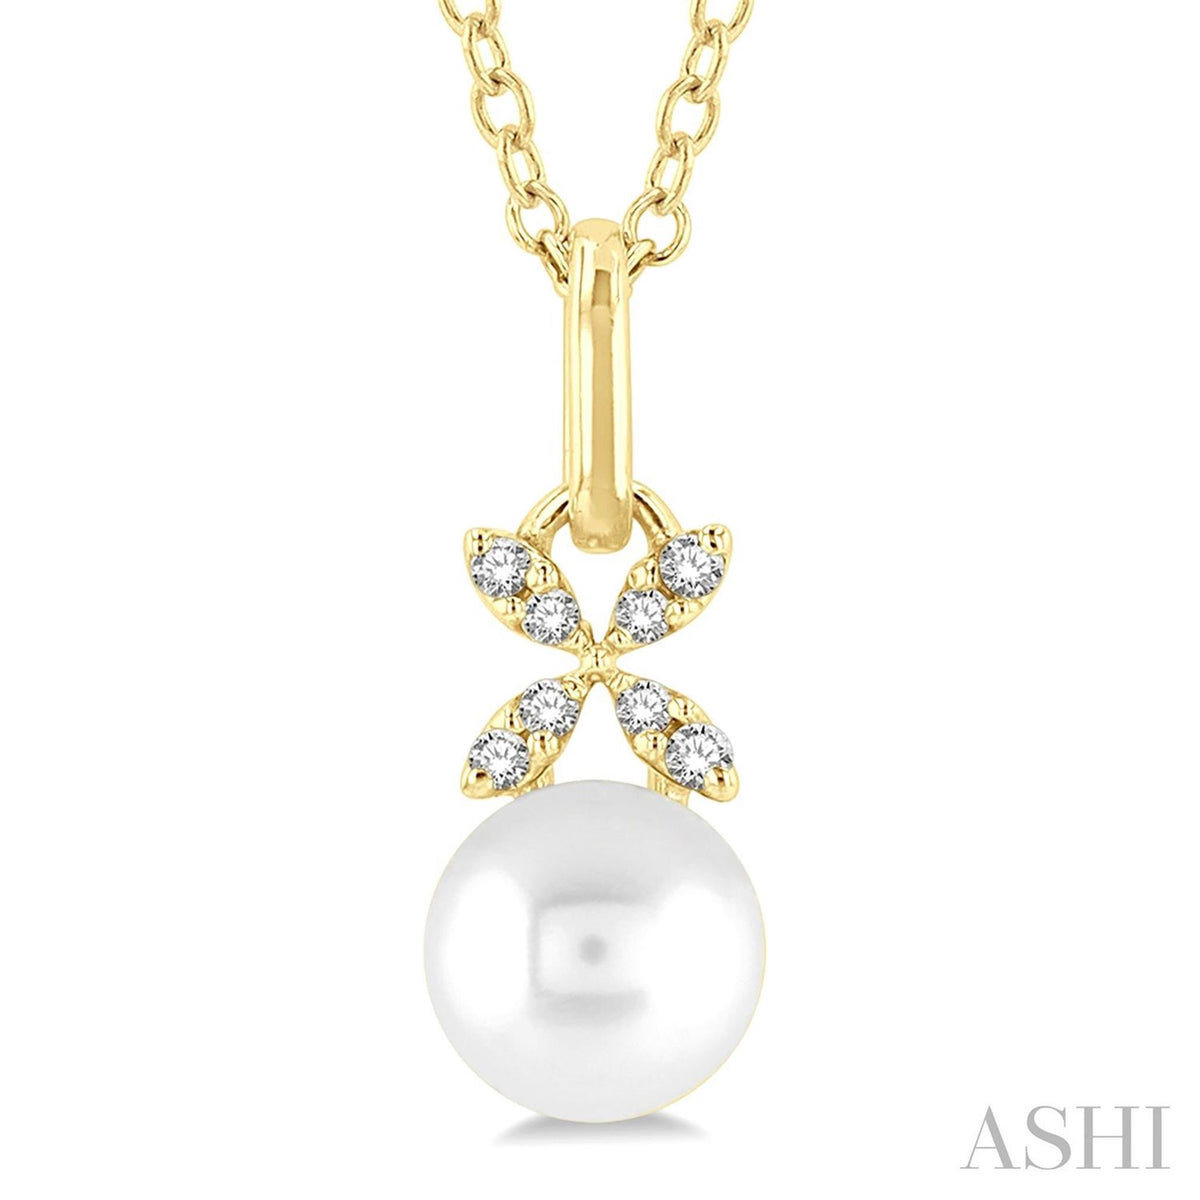 10Kt Yellow Gold Floral Pendant With 6mm Akoya Cultured Pearl and Diamonds